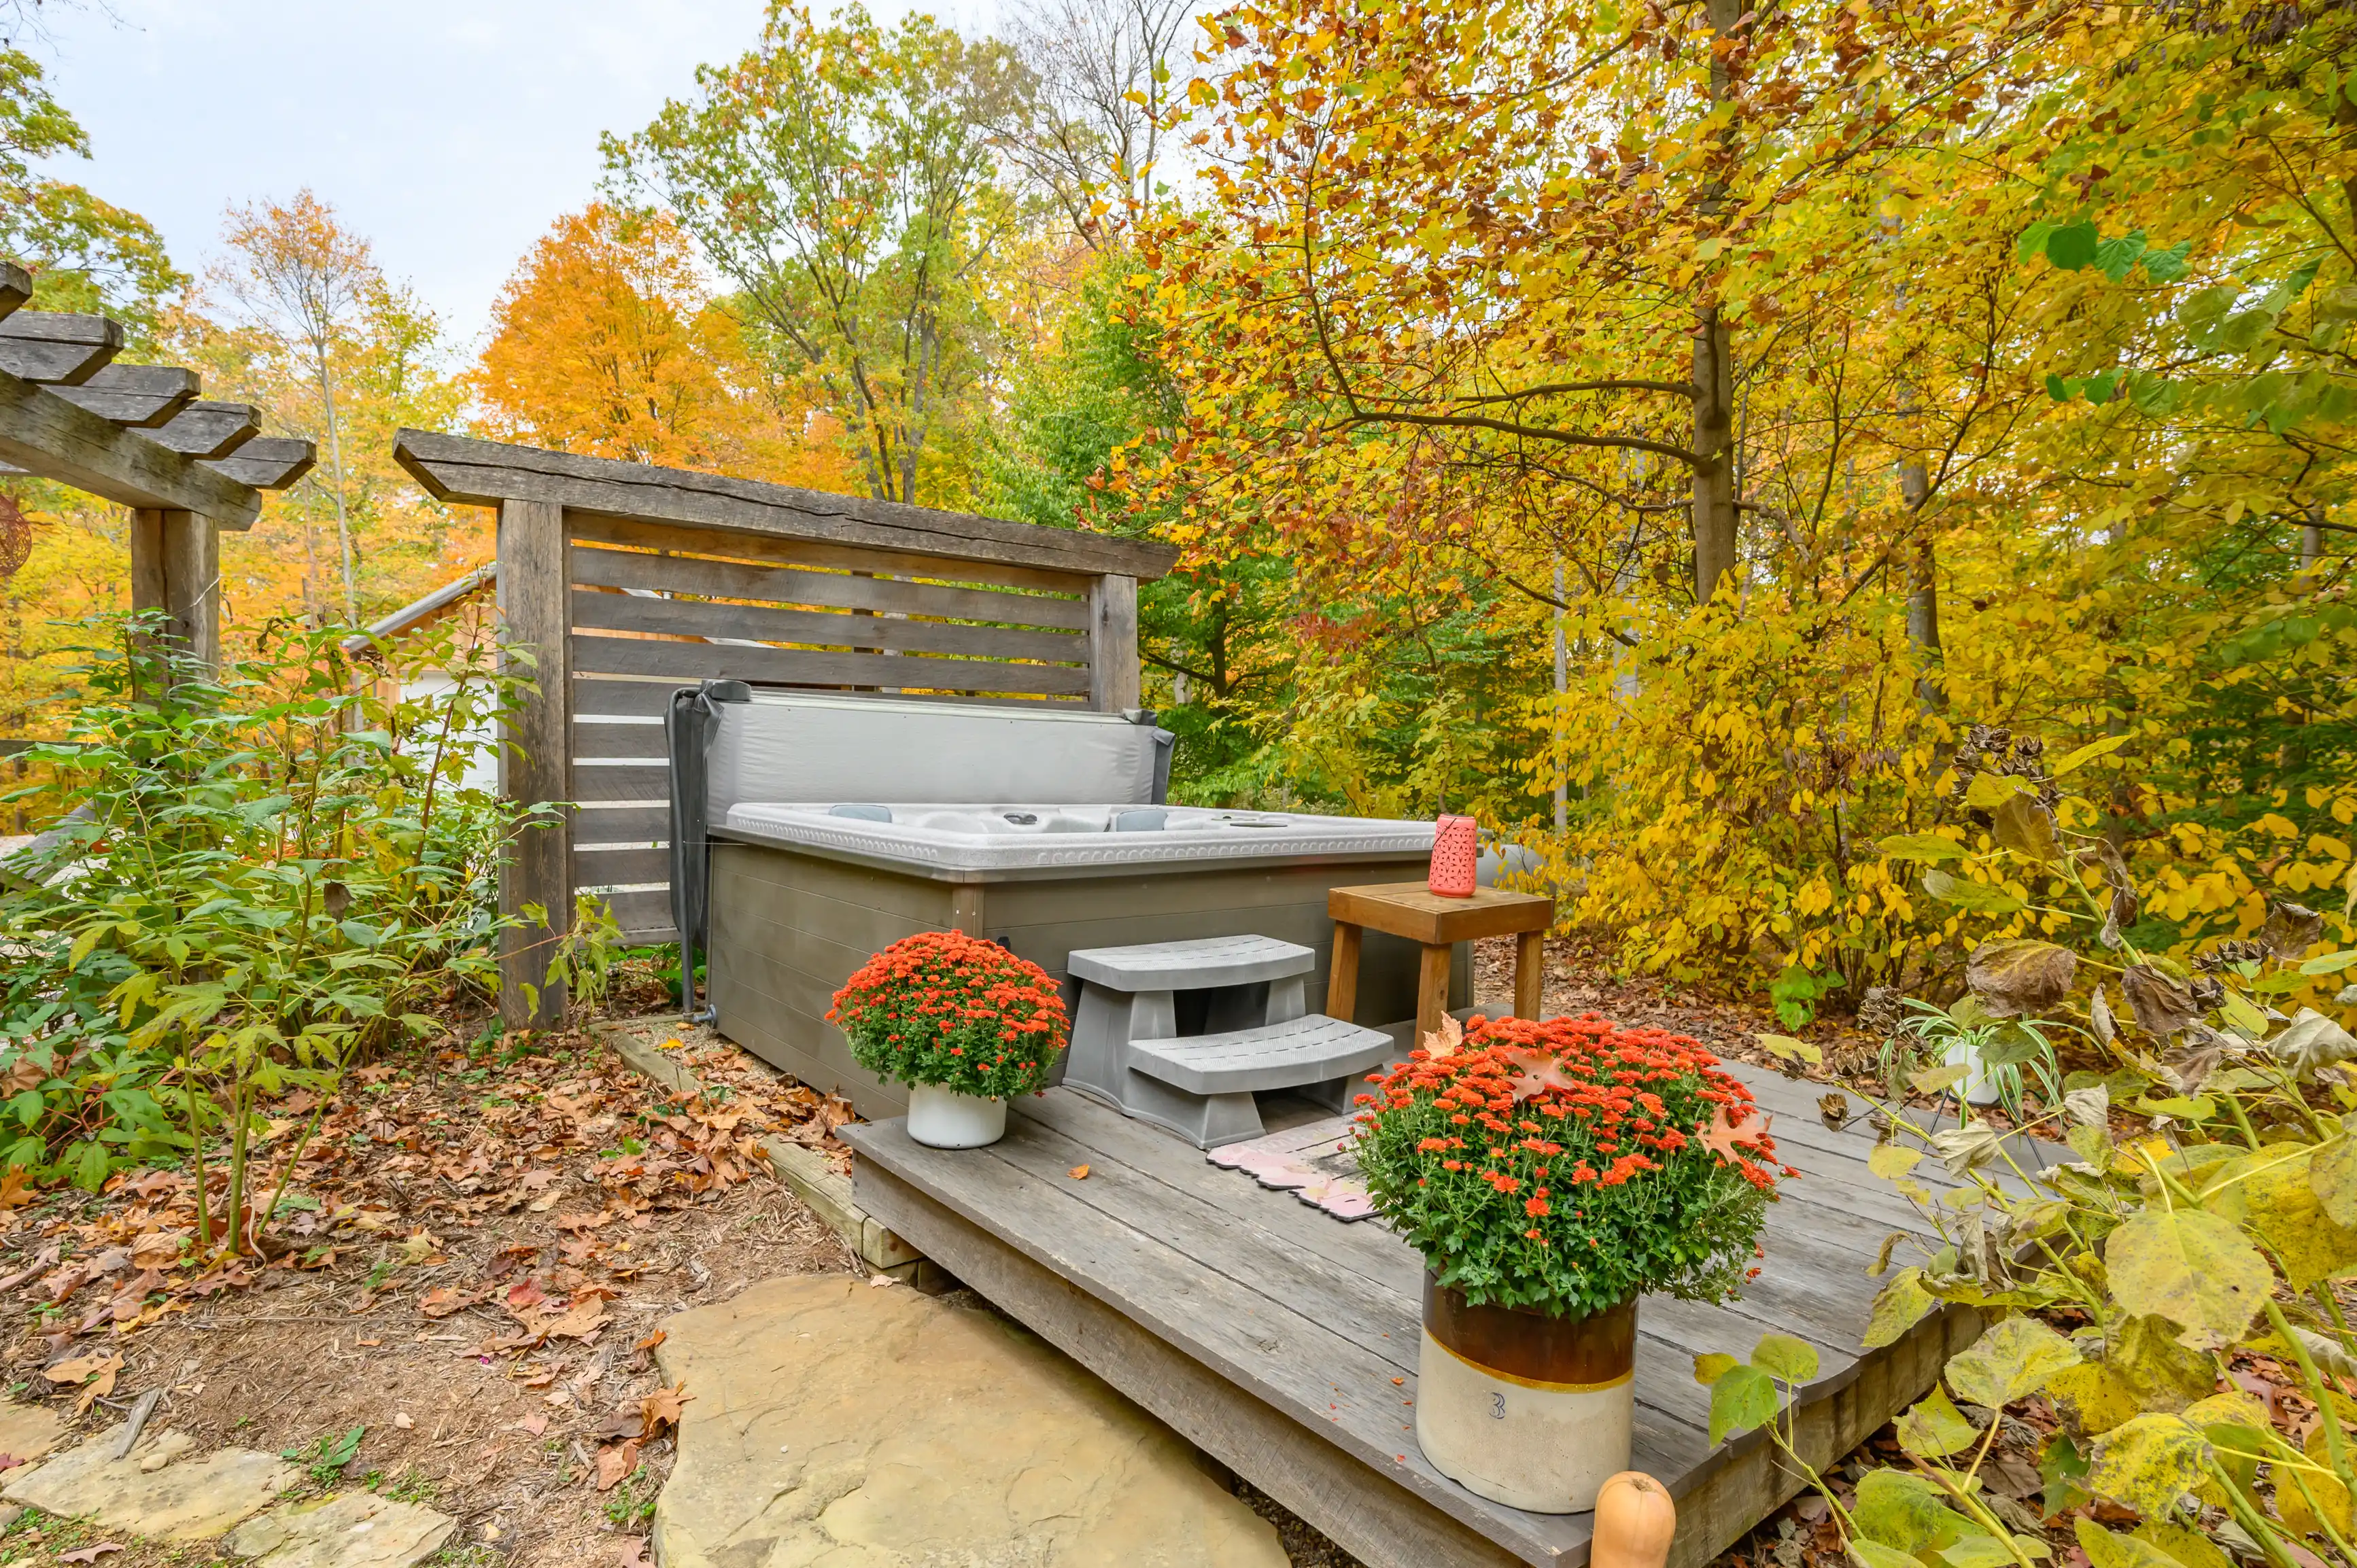 Outdoor hot tub on a wooden deck with steps, surrounded by autumn-colored trees and pots of blooming chrysanthemums.